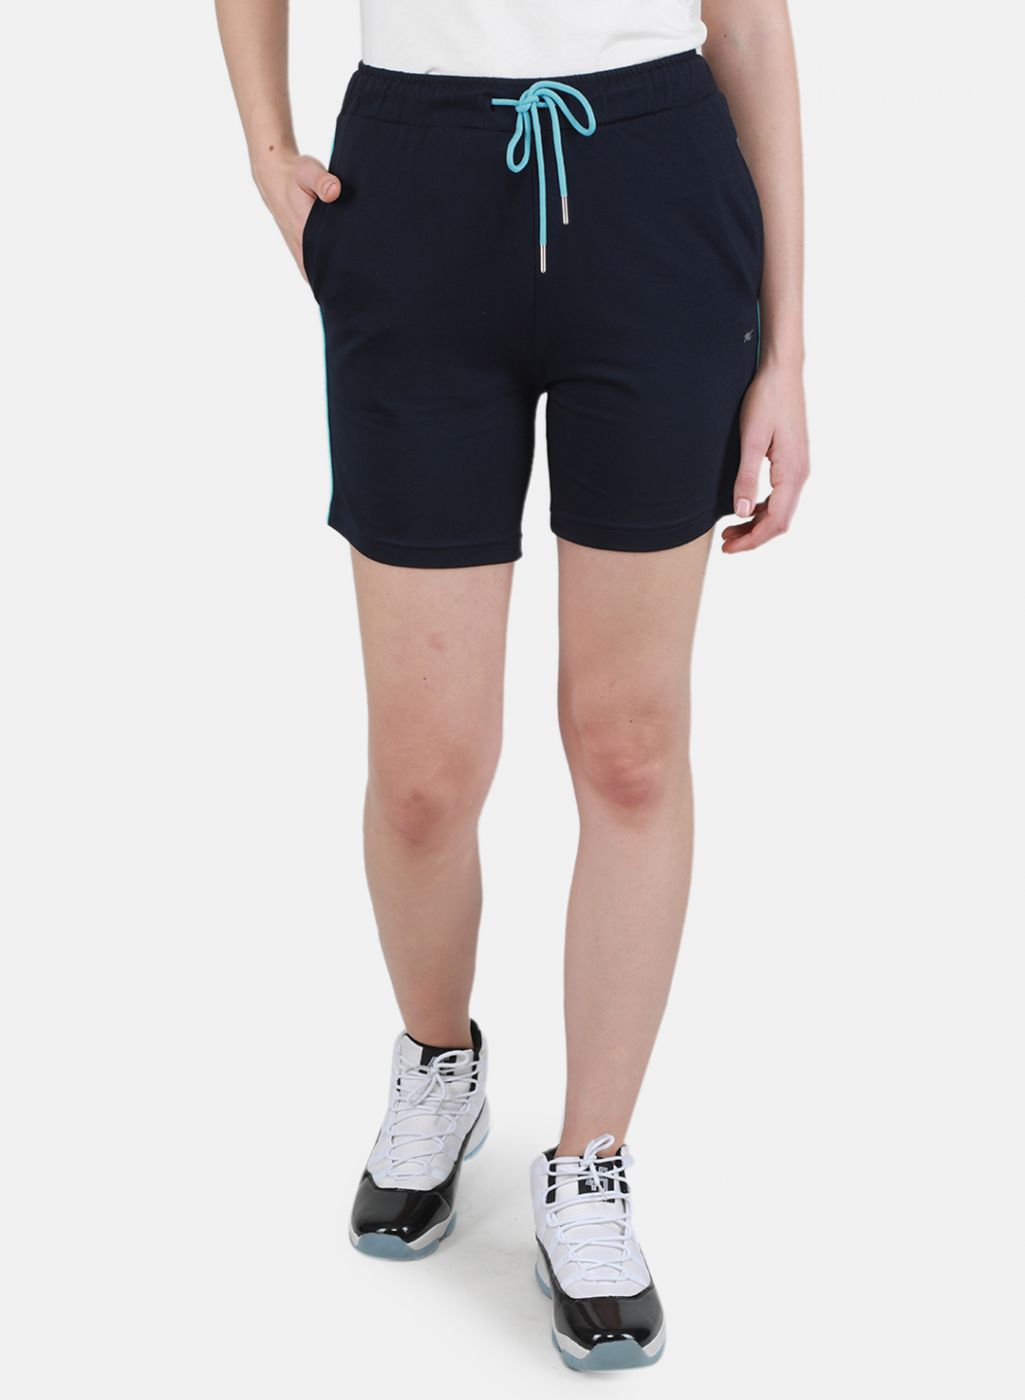 Ladies Shorts - Buy Shorts for Women Online - Monte Carlo